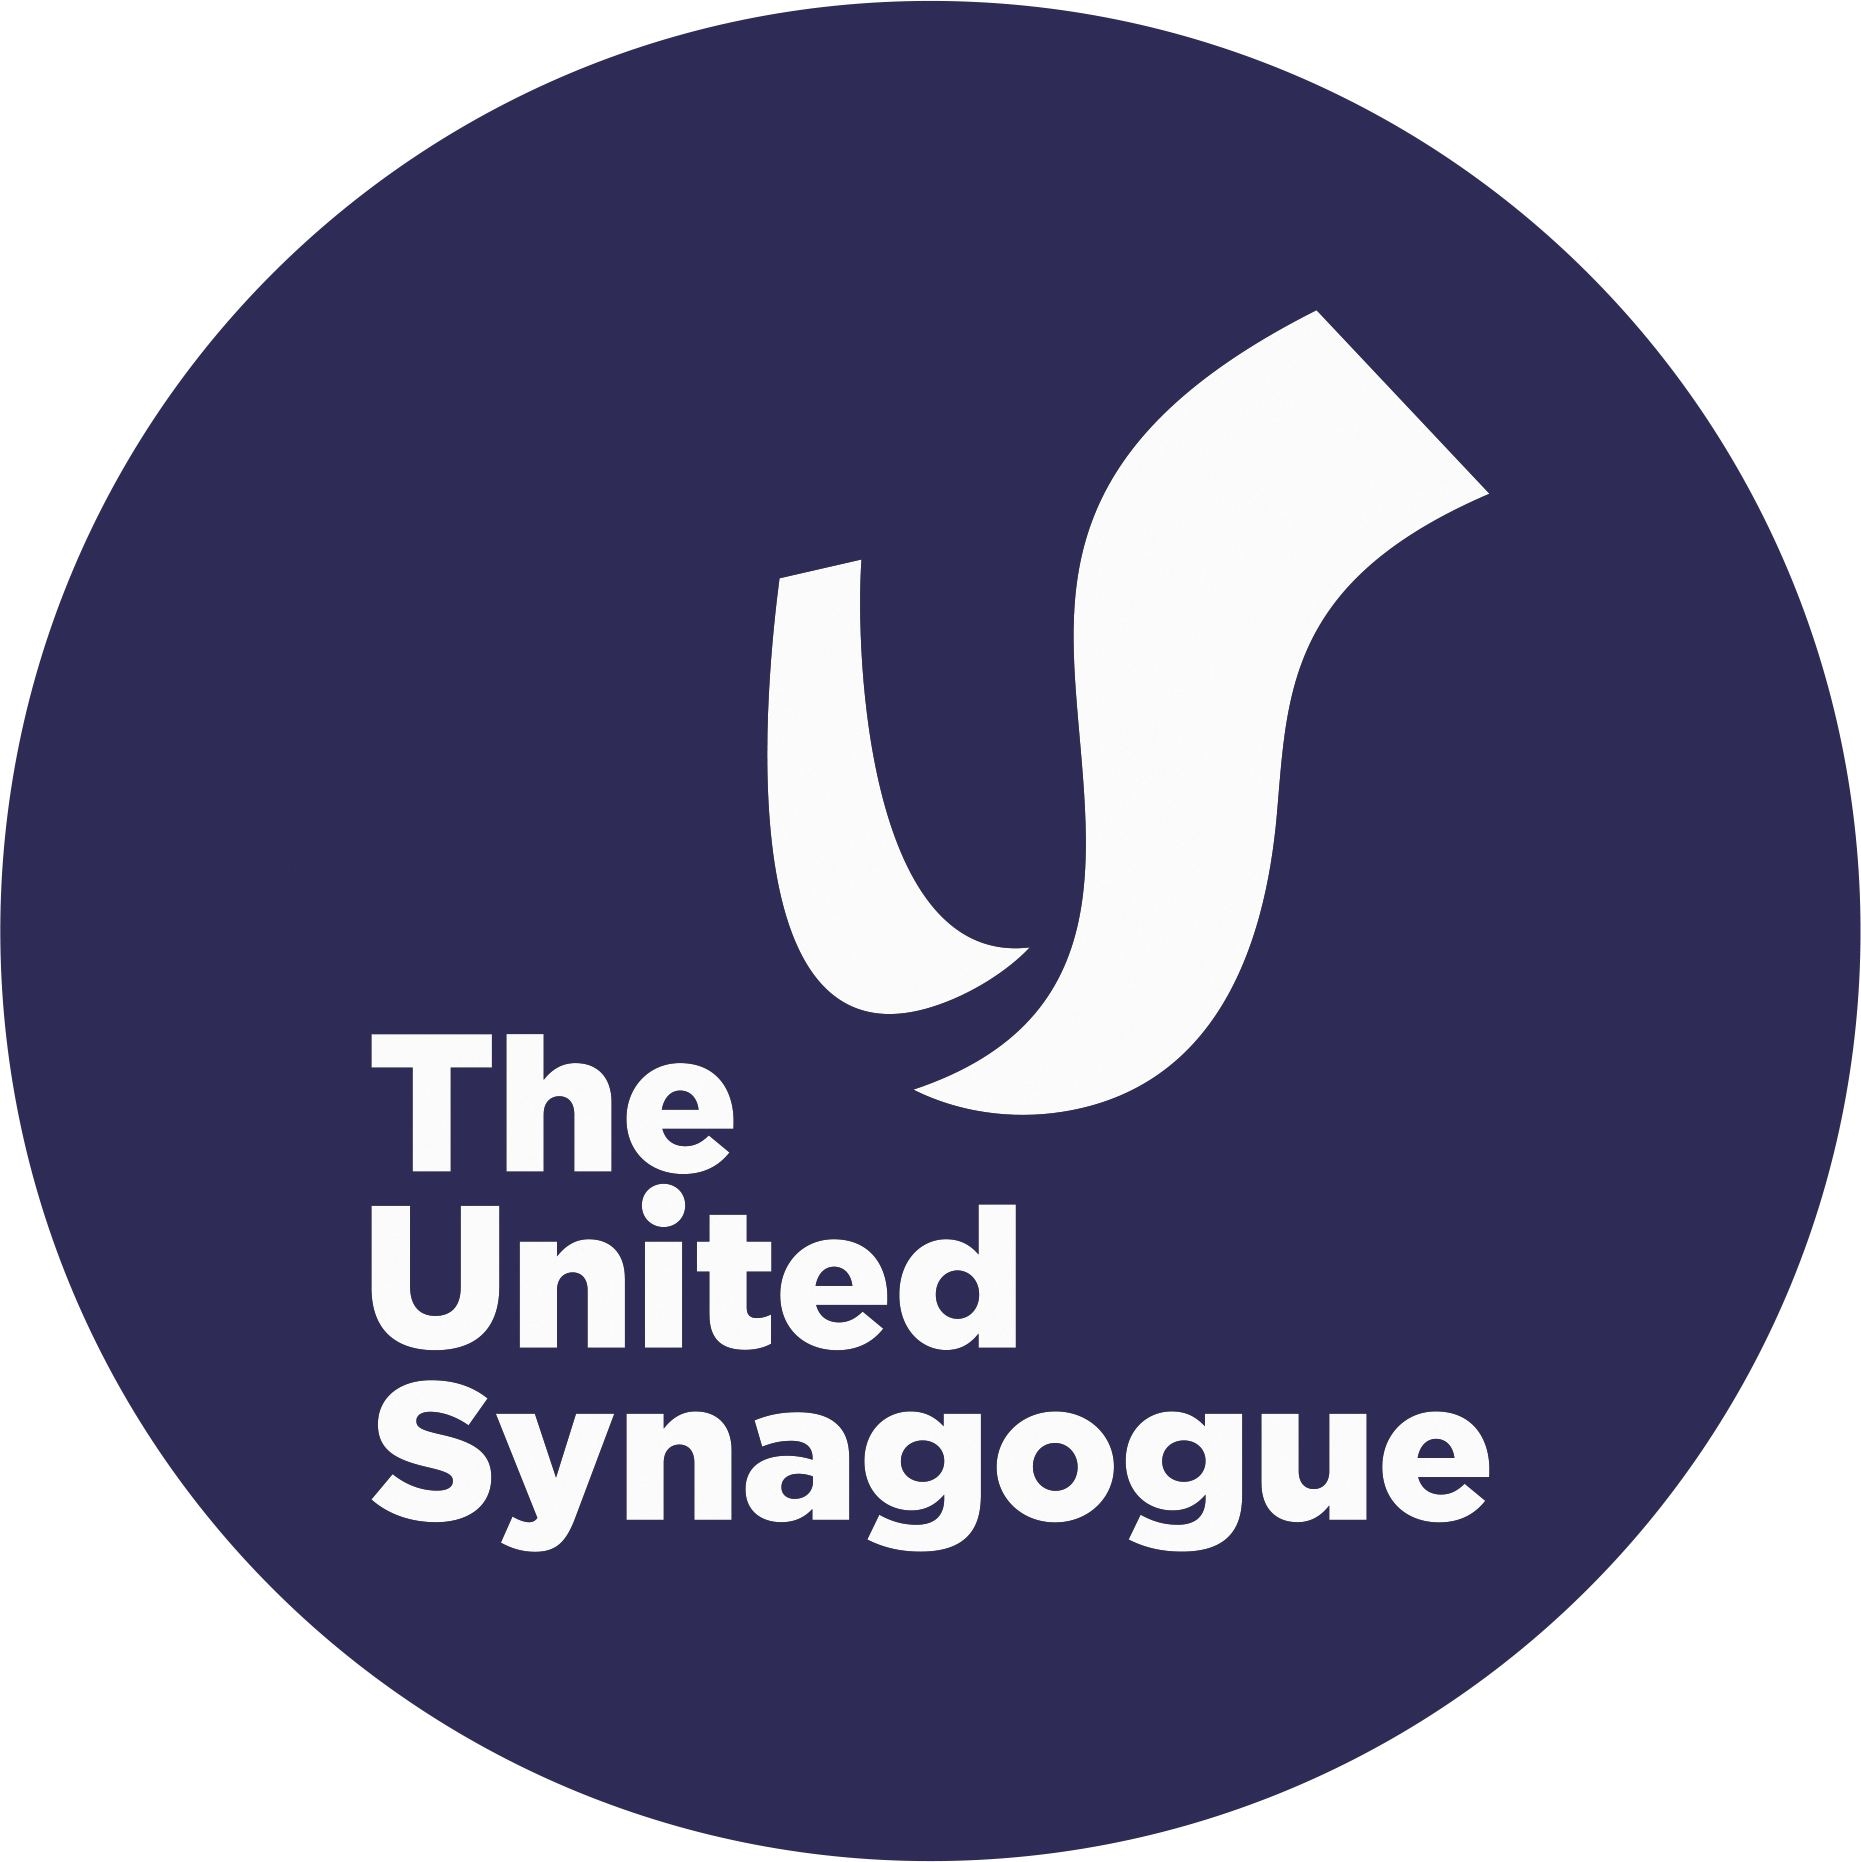 The United Synagogue